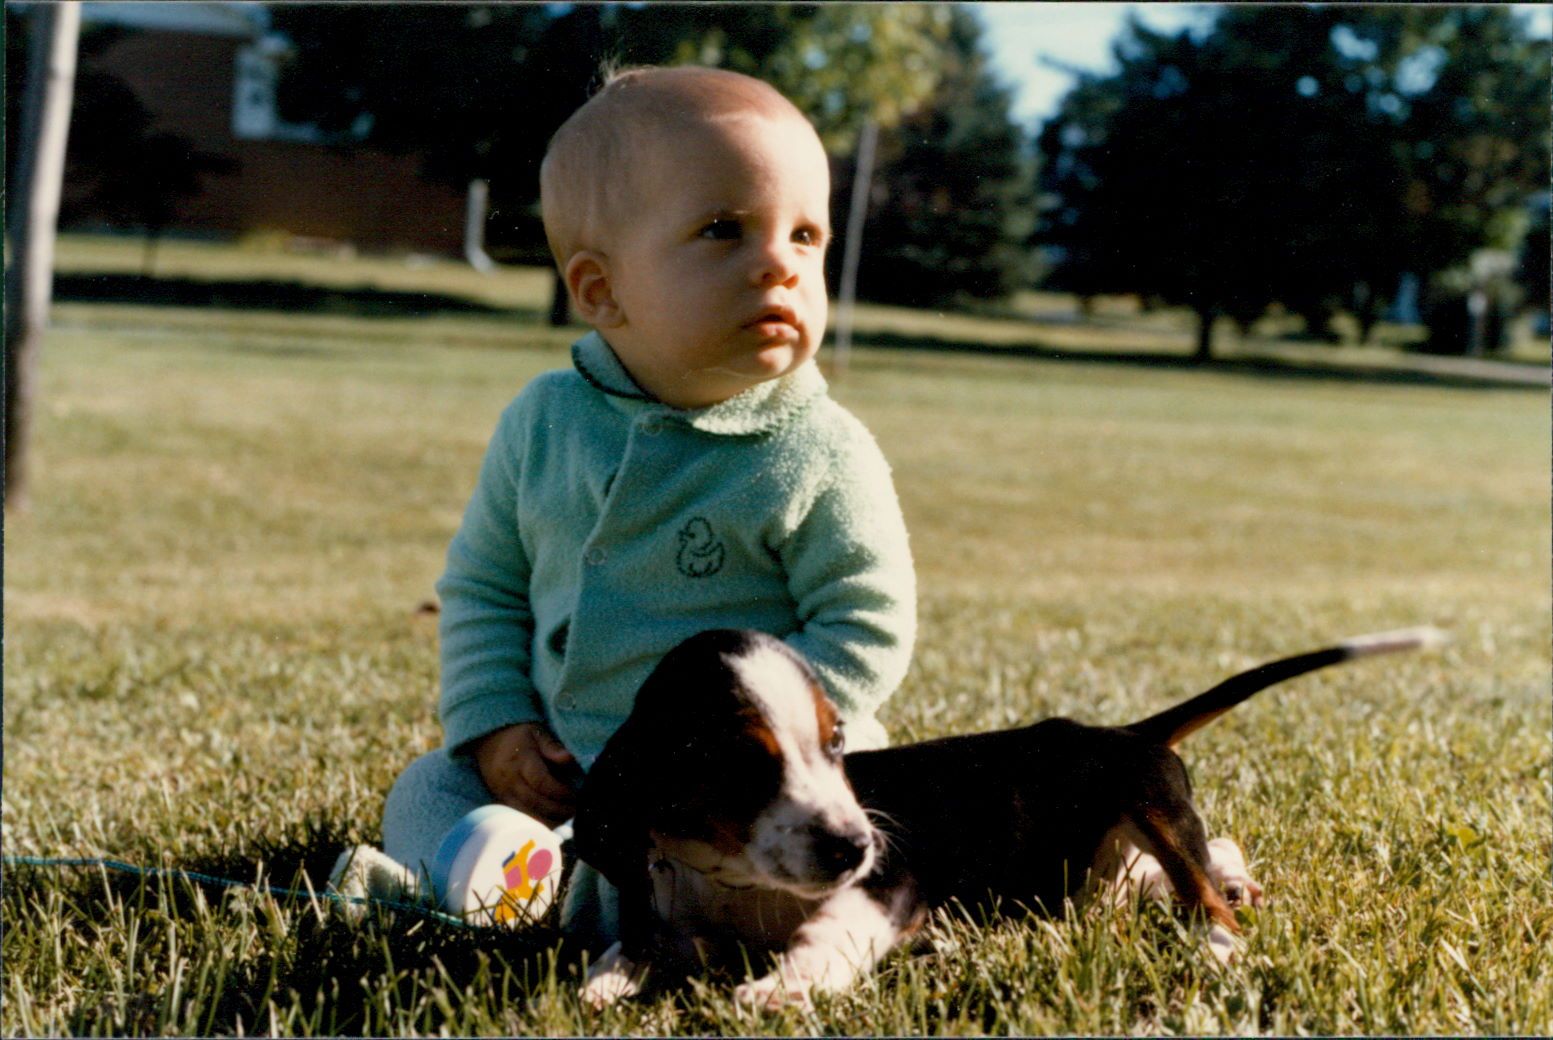 A baby and a puppy sitting outside in the lawn, with a vintage style